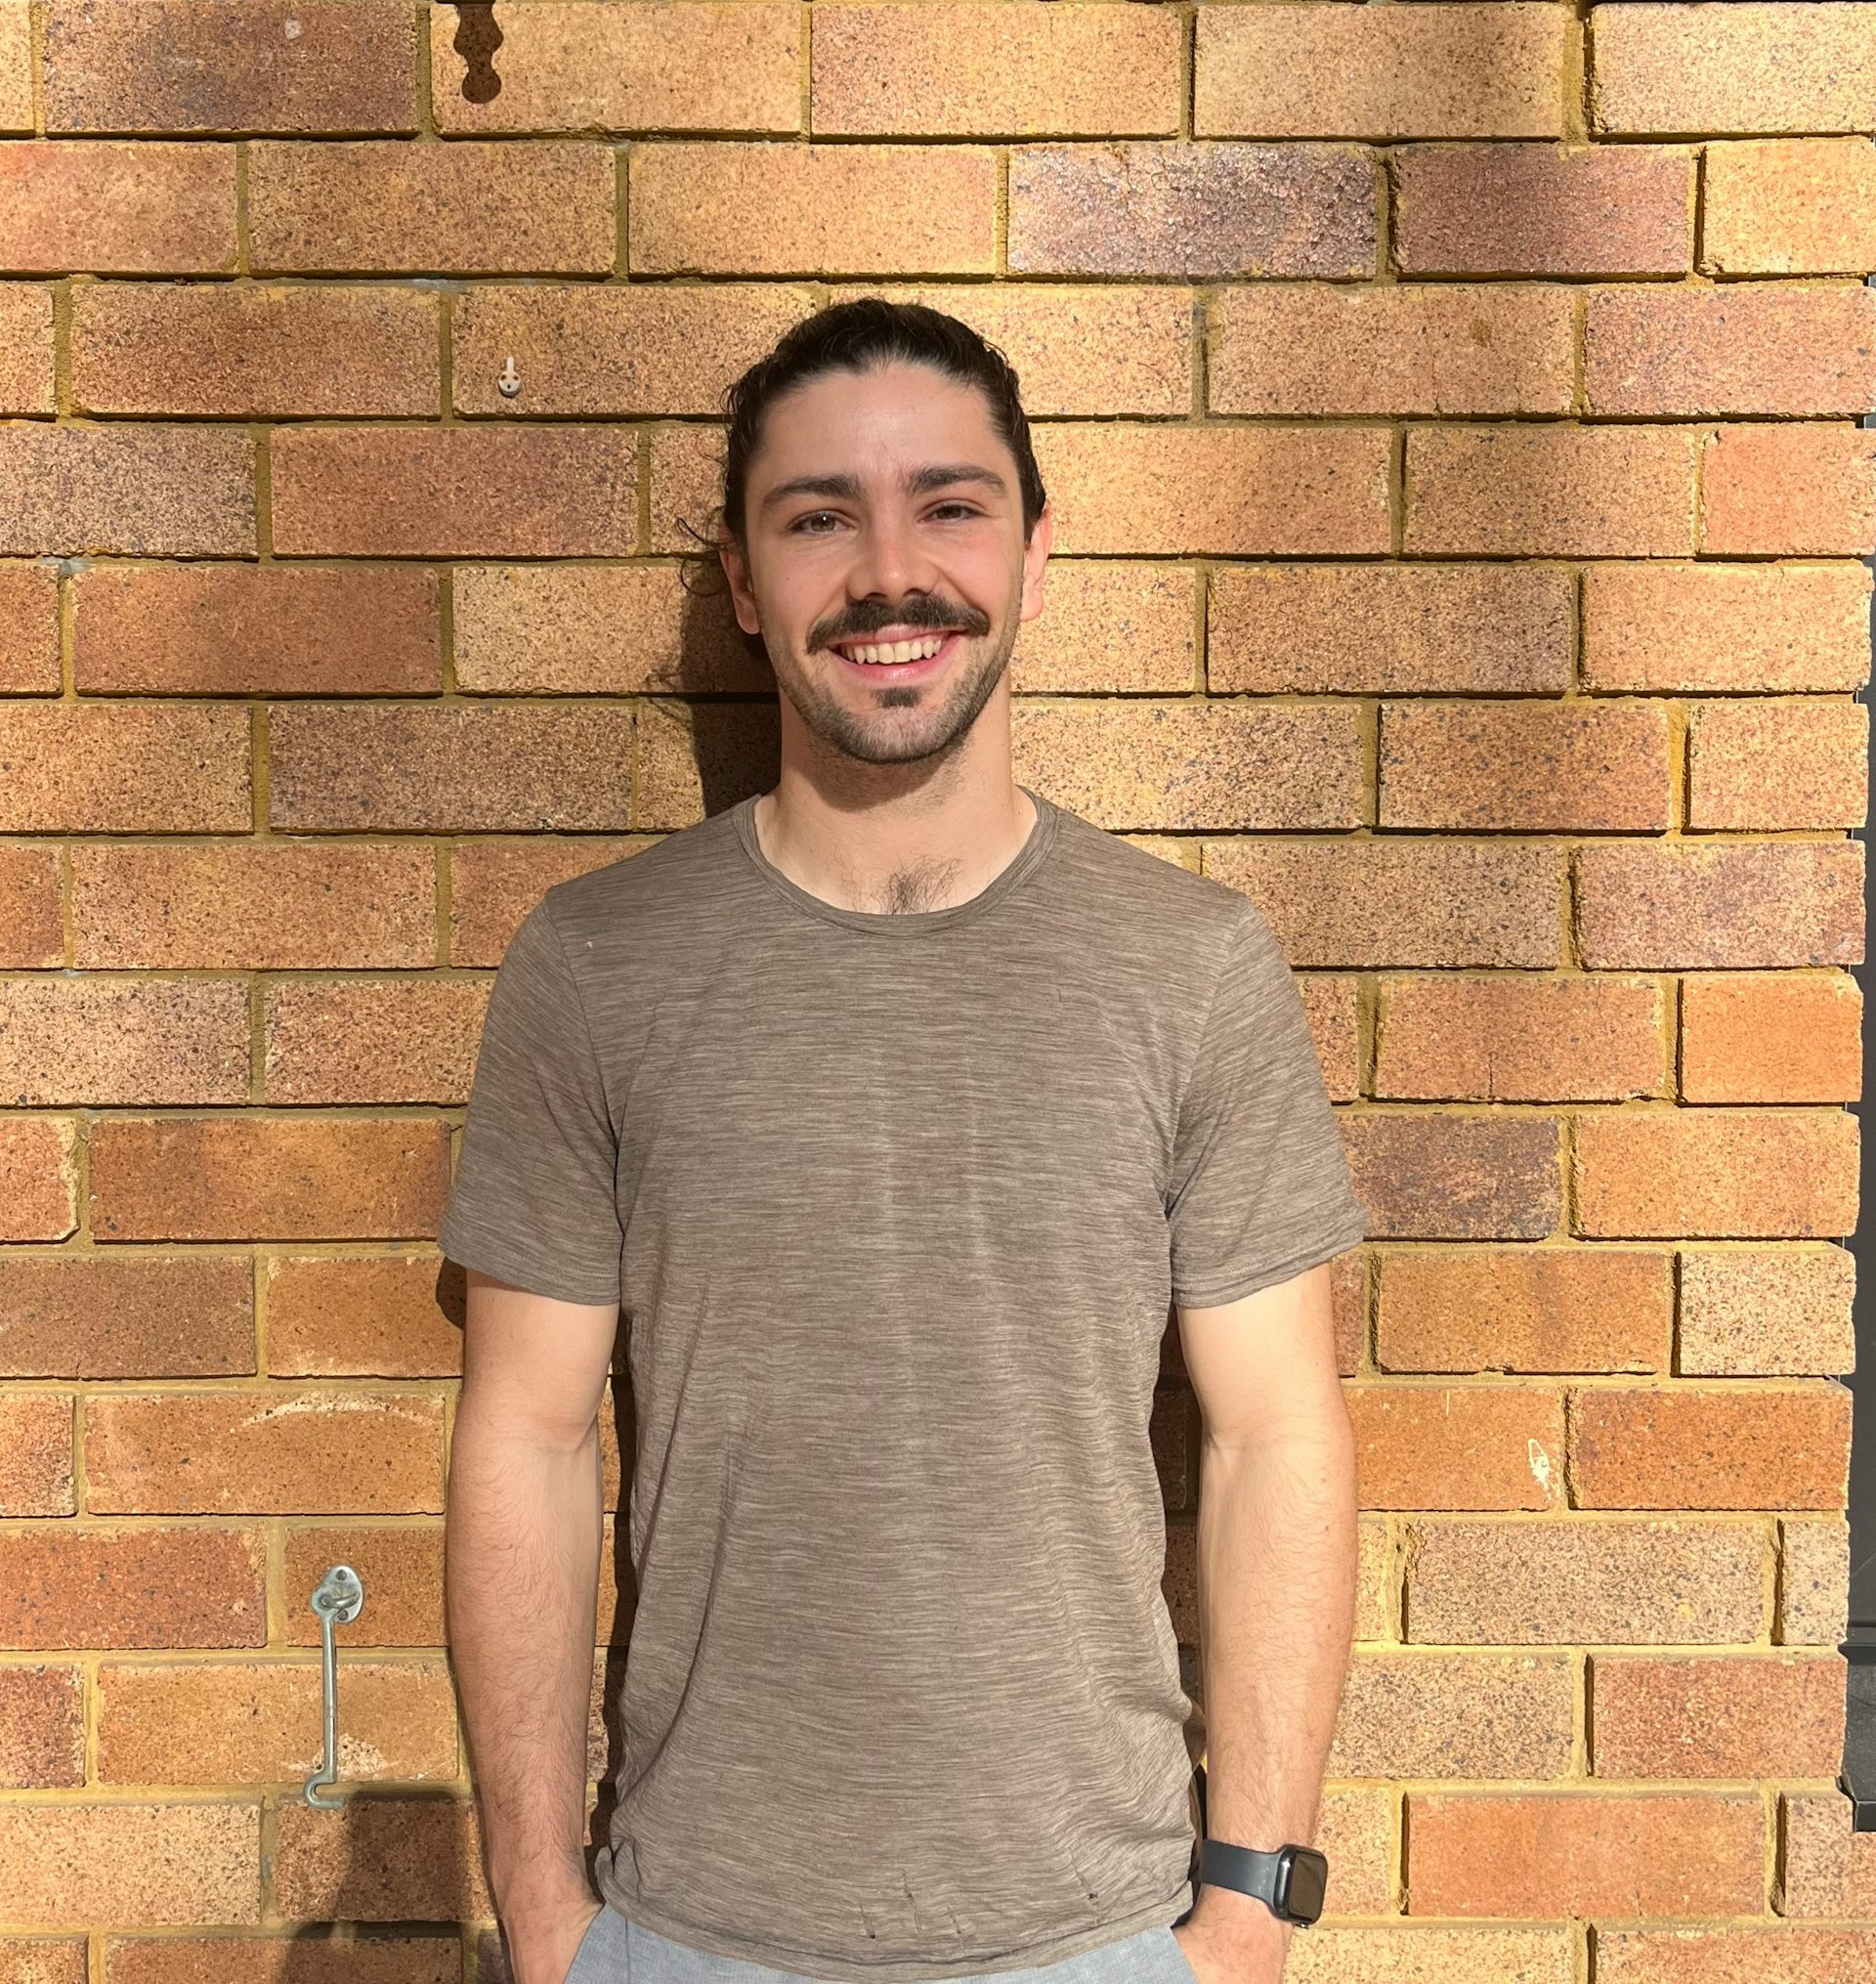 Tim stands in front of a brick wall, smiling at the camera with his hands in his pockets.